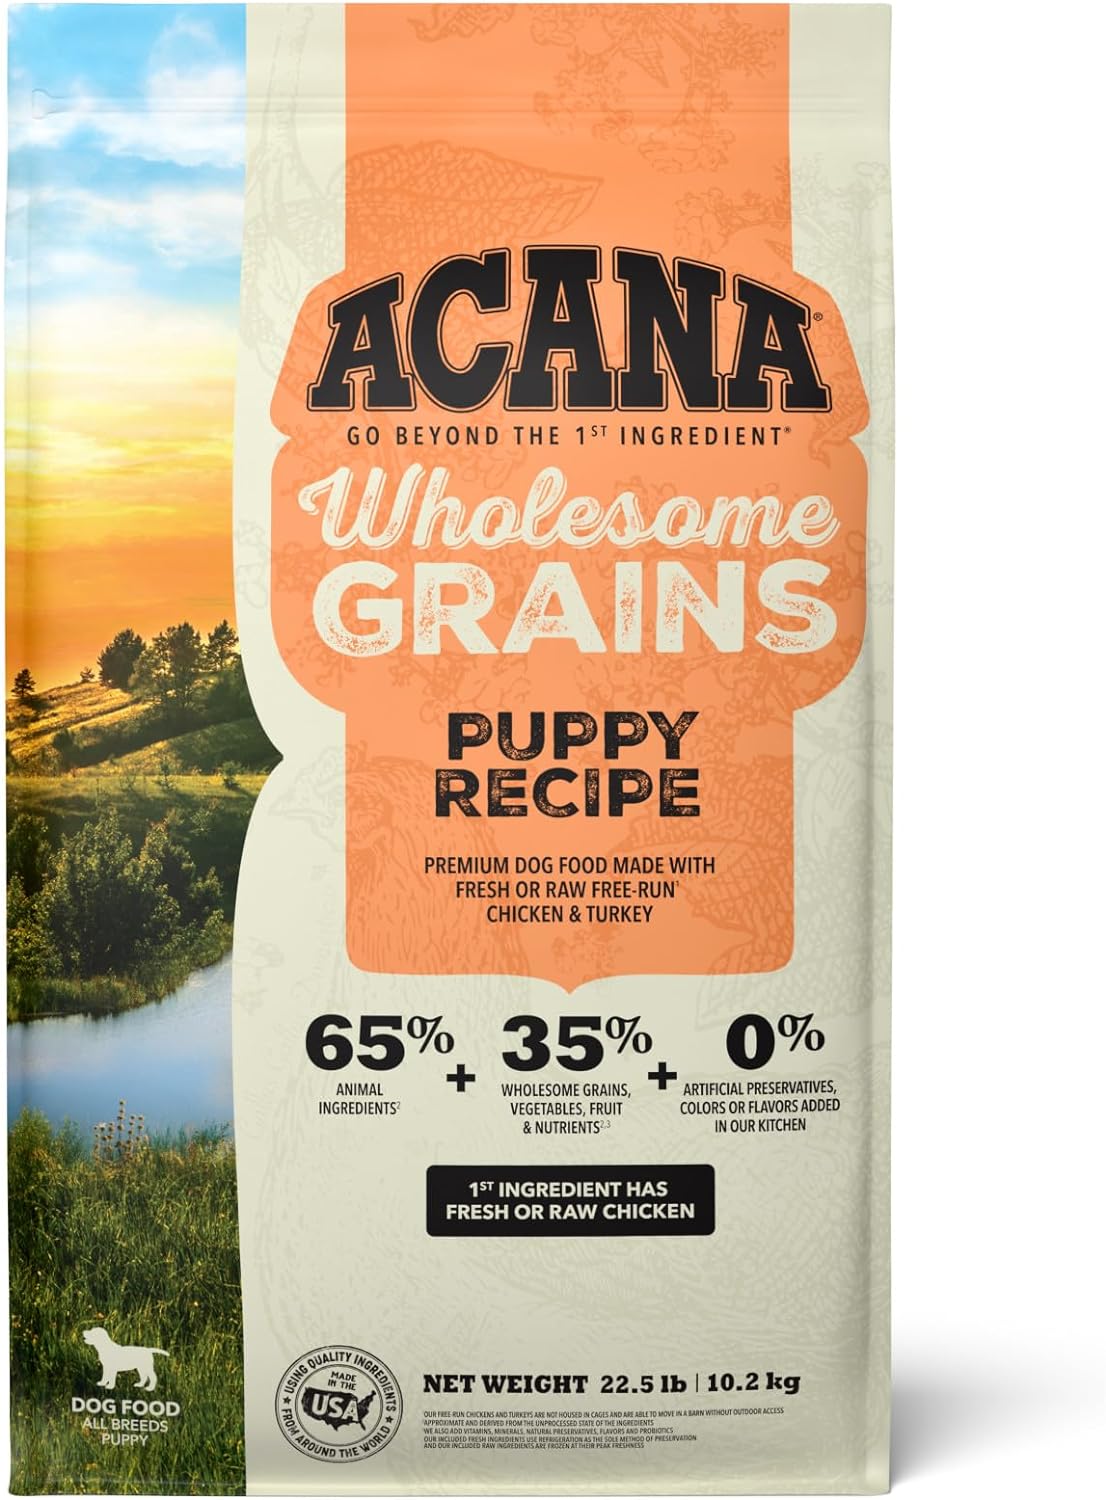 ACANA Wholesome Grains Dry Dog Food, Puppy Recipe, Real Chicken, Eggs and Turkey Dog Food Recipe, 22.5lb